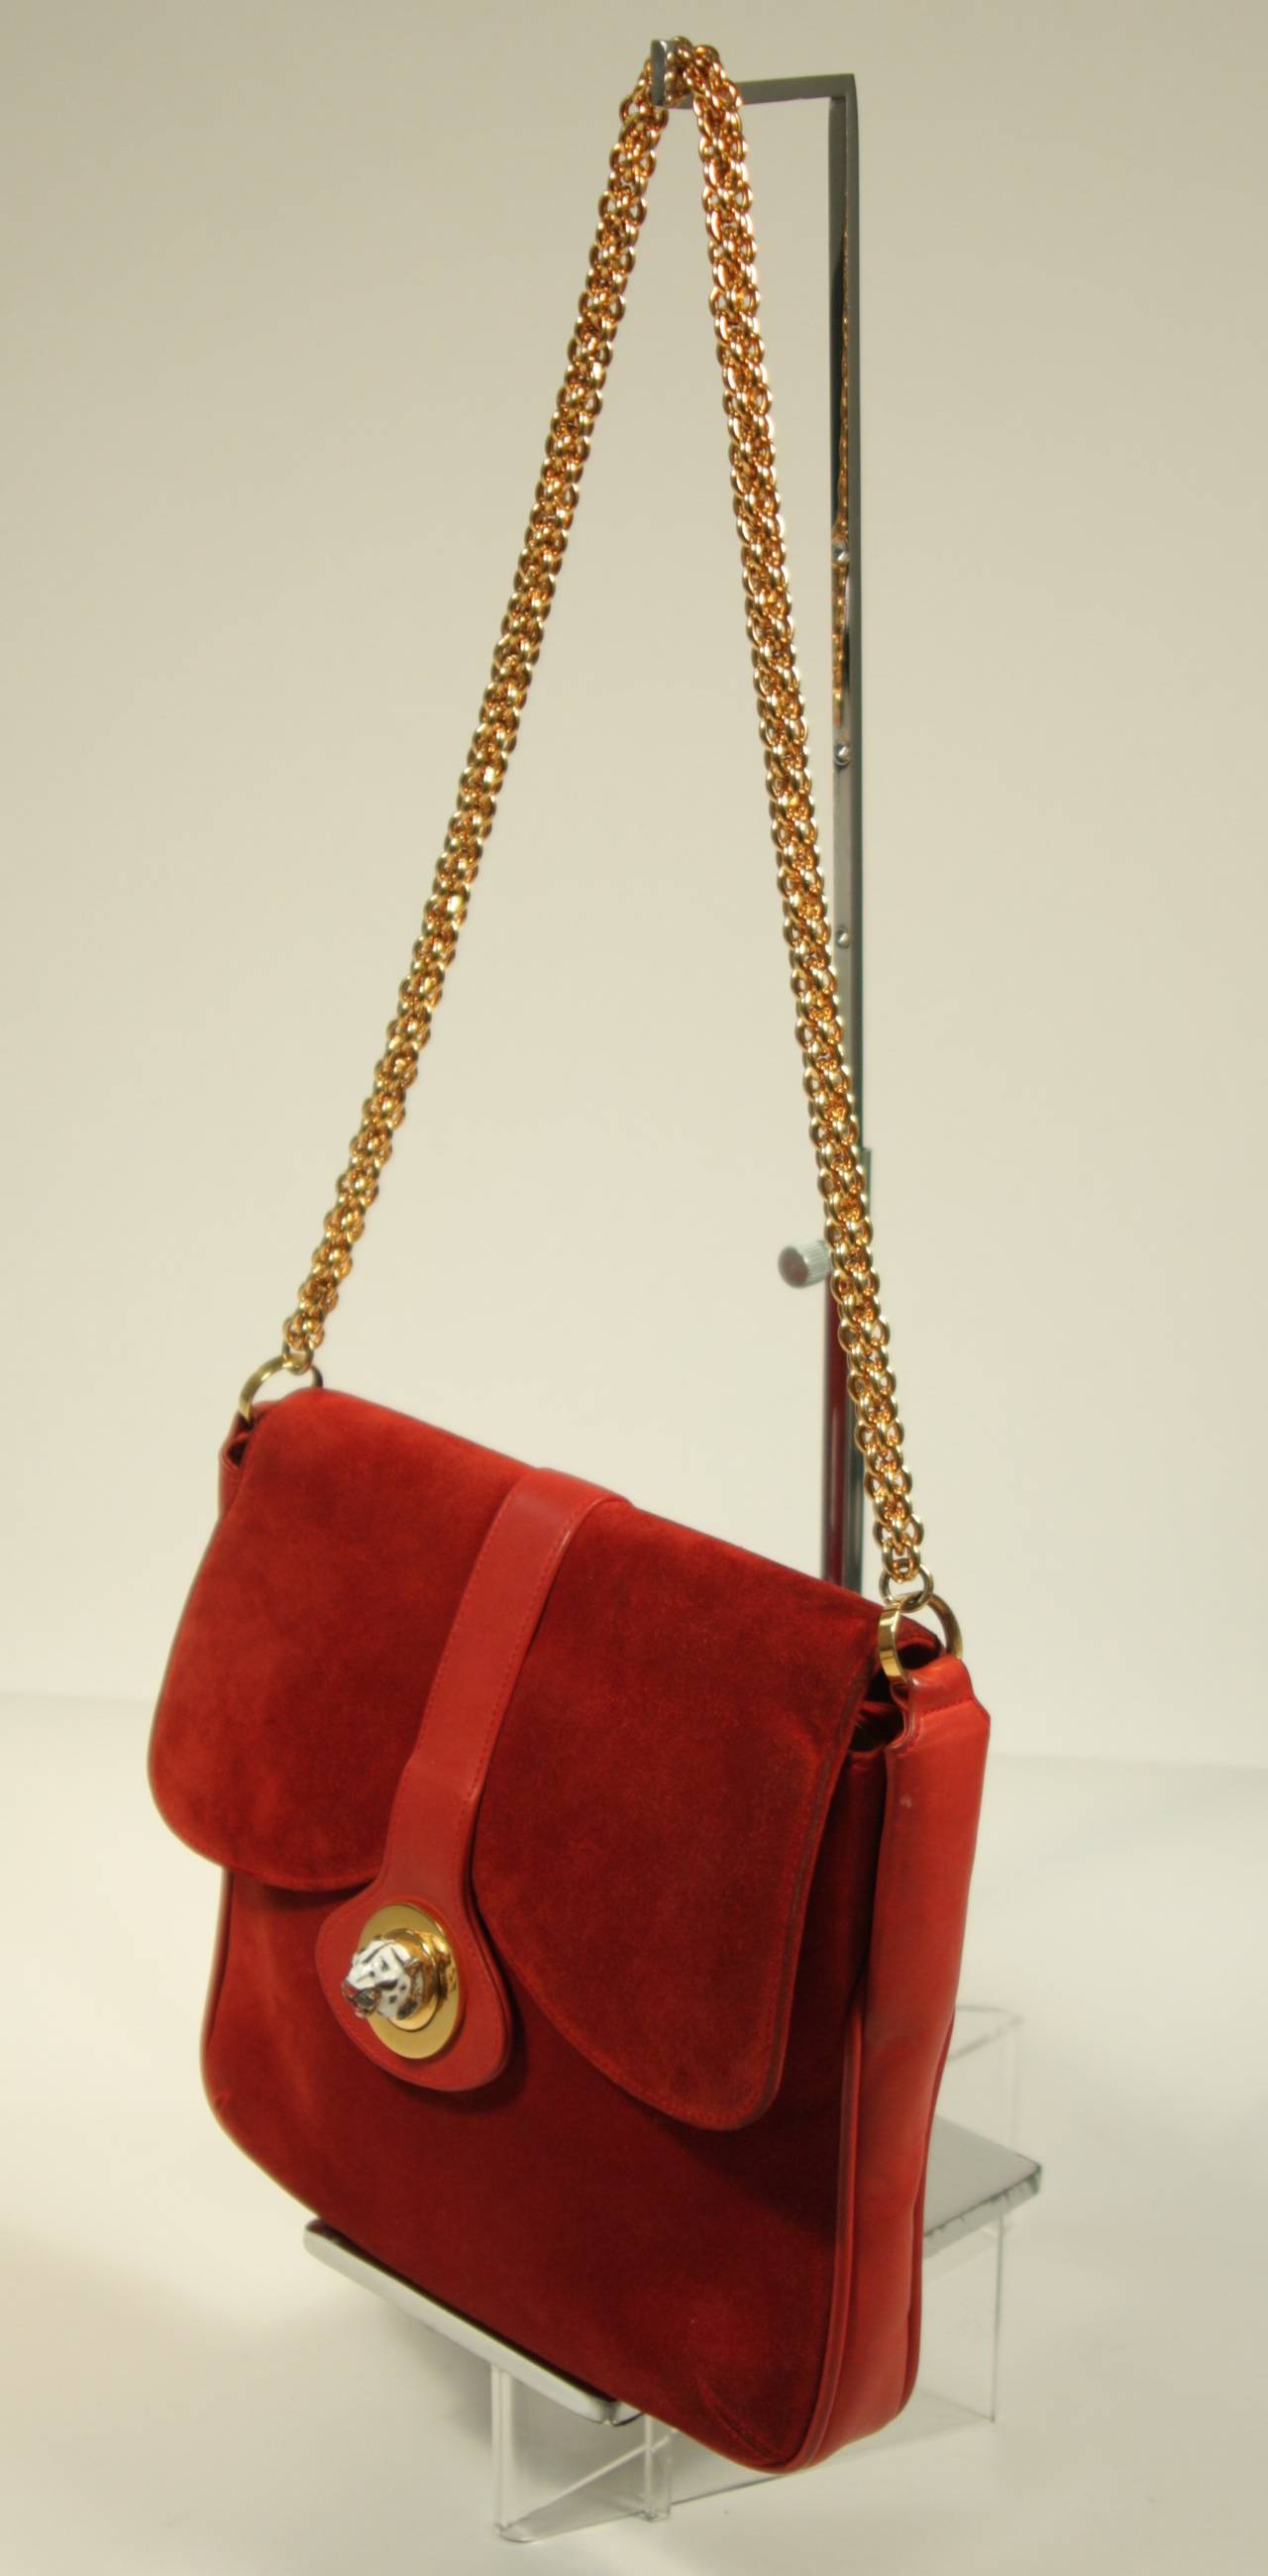 Gucci Red Rust Colored Suede Purse with Enamel Tiger Clasp at 1stdibs